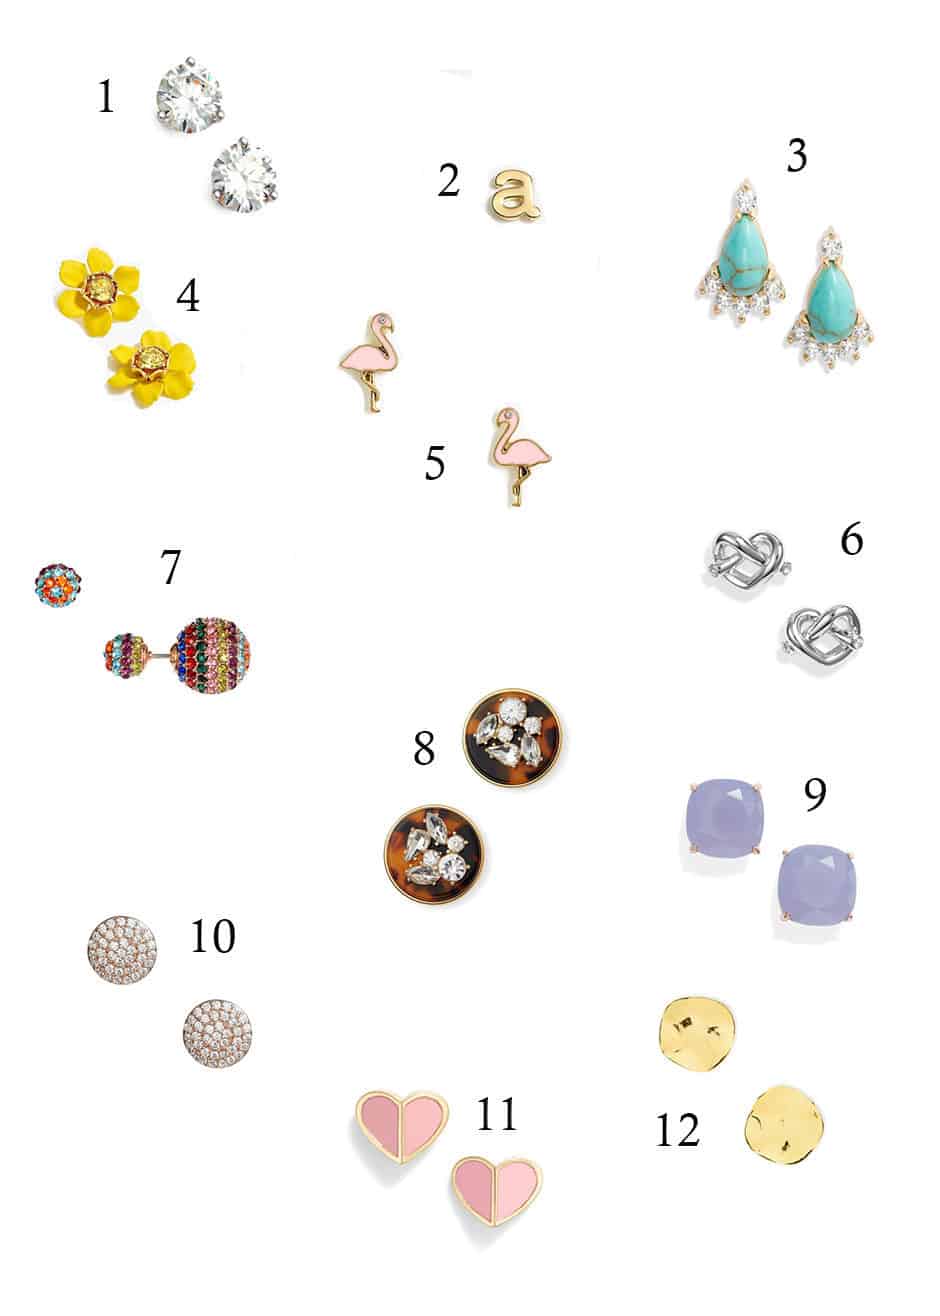 Looking for some cute studs to throw in no matter what you're wearing? This roundup has every style imaginable and they're all perfect for everyday wear! Throw in a pair of faux diamond stud earrings or simply some gold bars and look like you actually took time getting ready.﻿